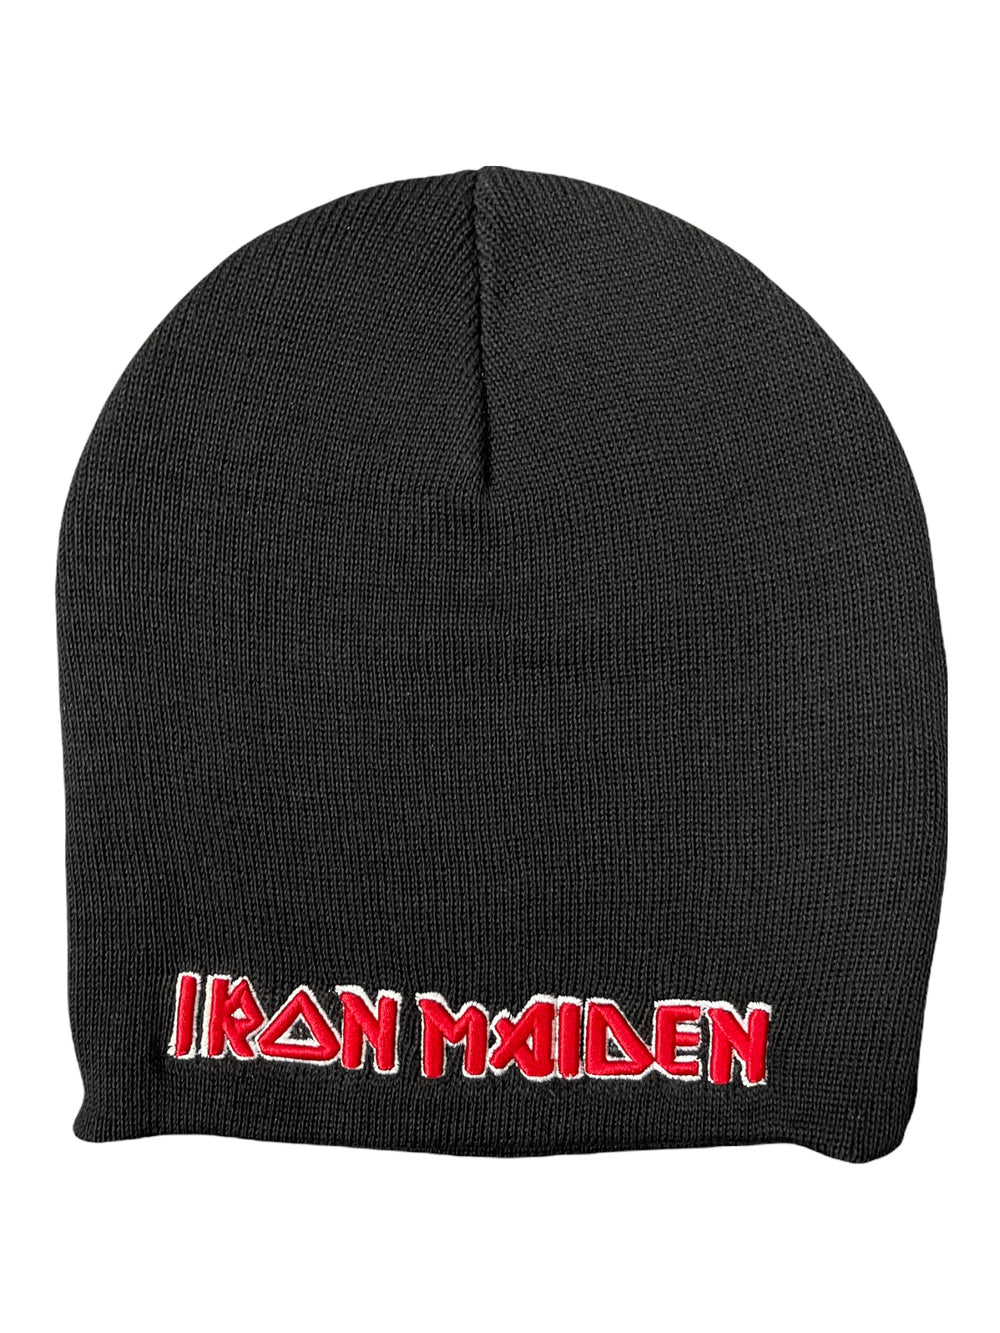 Iron Maiden - Red Logo Embroidery Official Beanie Hat One Size Fits All NEW